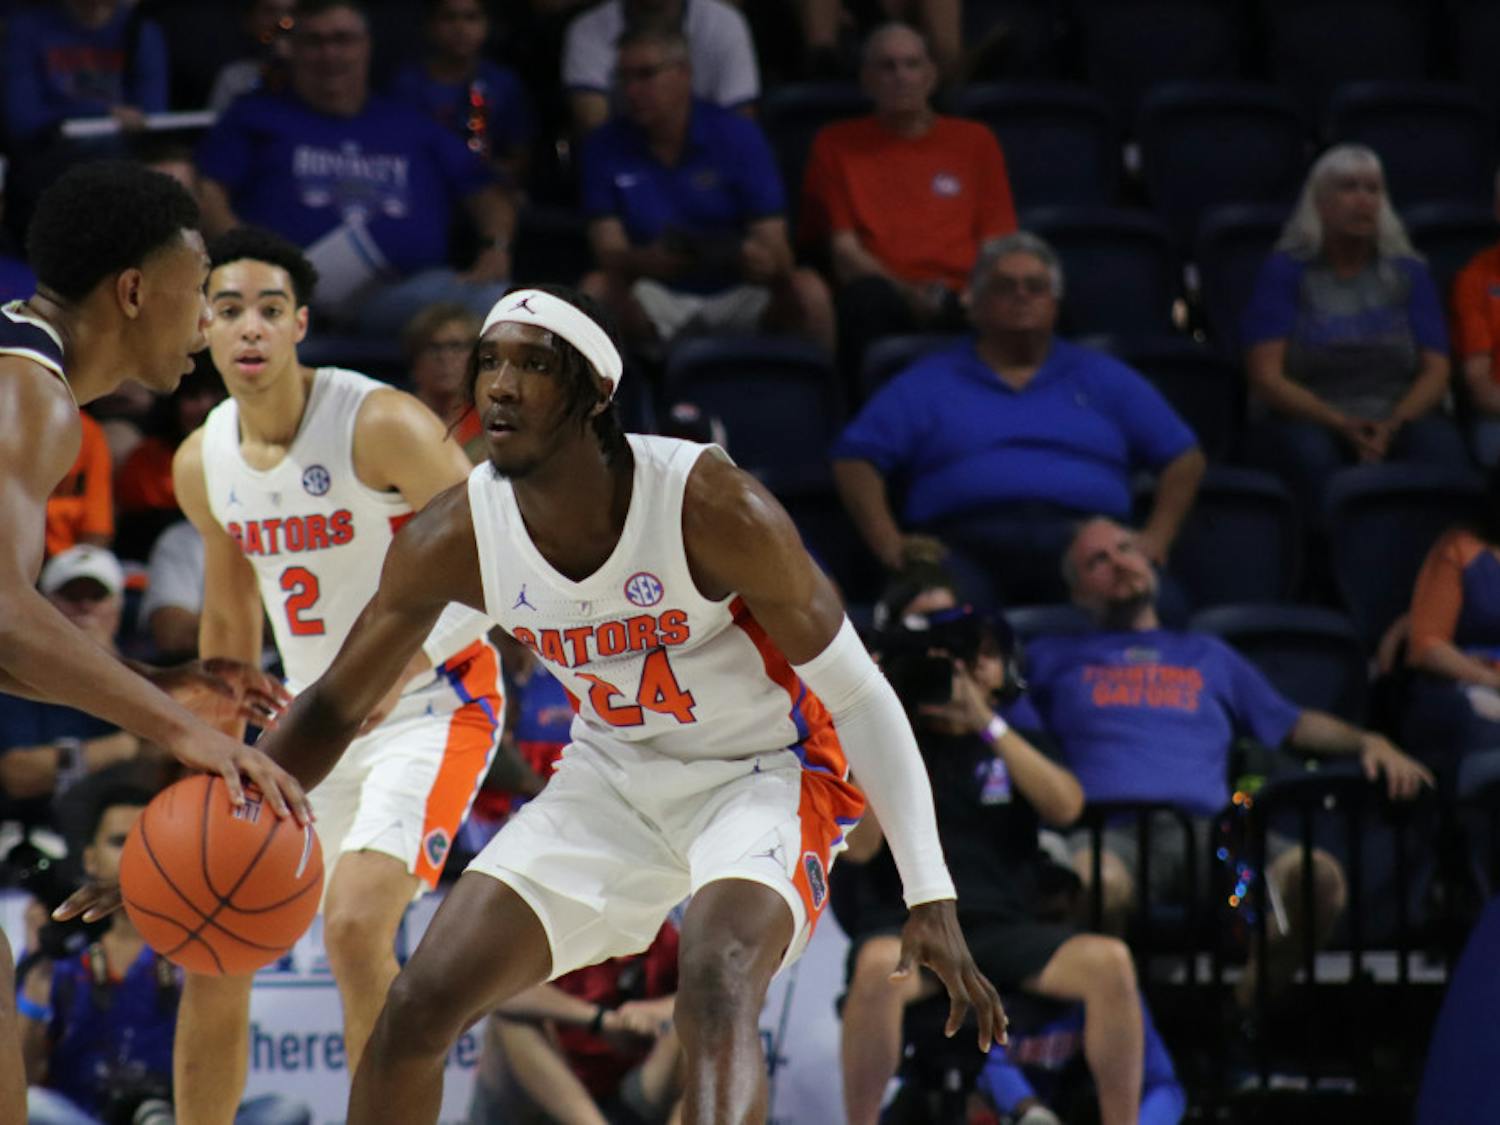 Florida guard Deaundrae Ballard leads the Gators with 10.9 points per game.